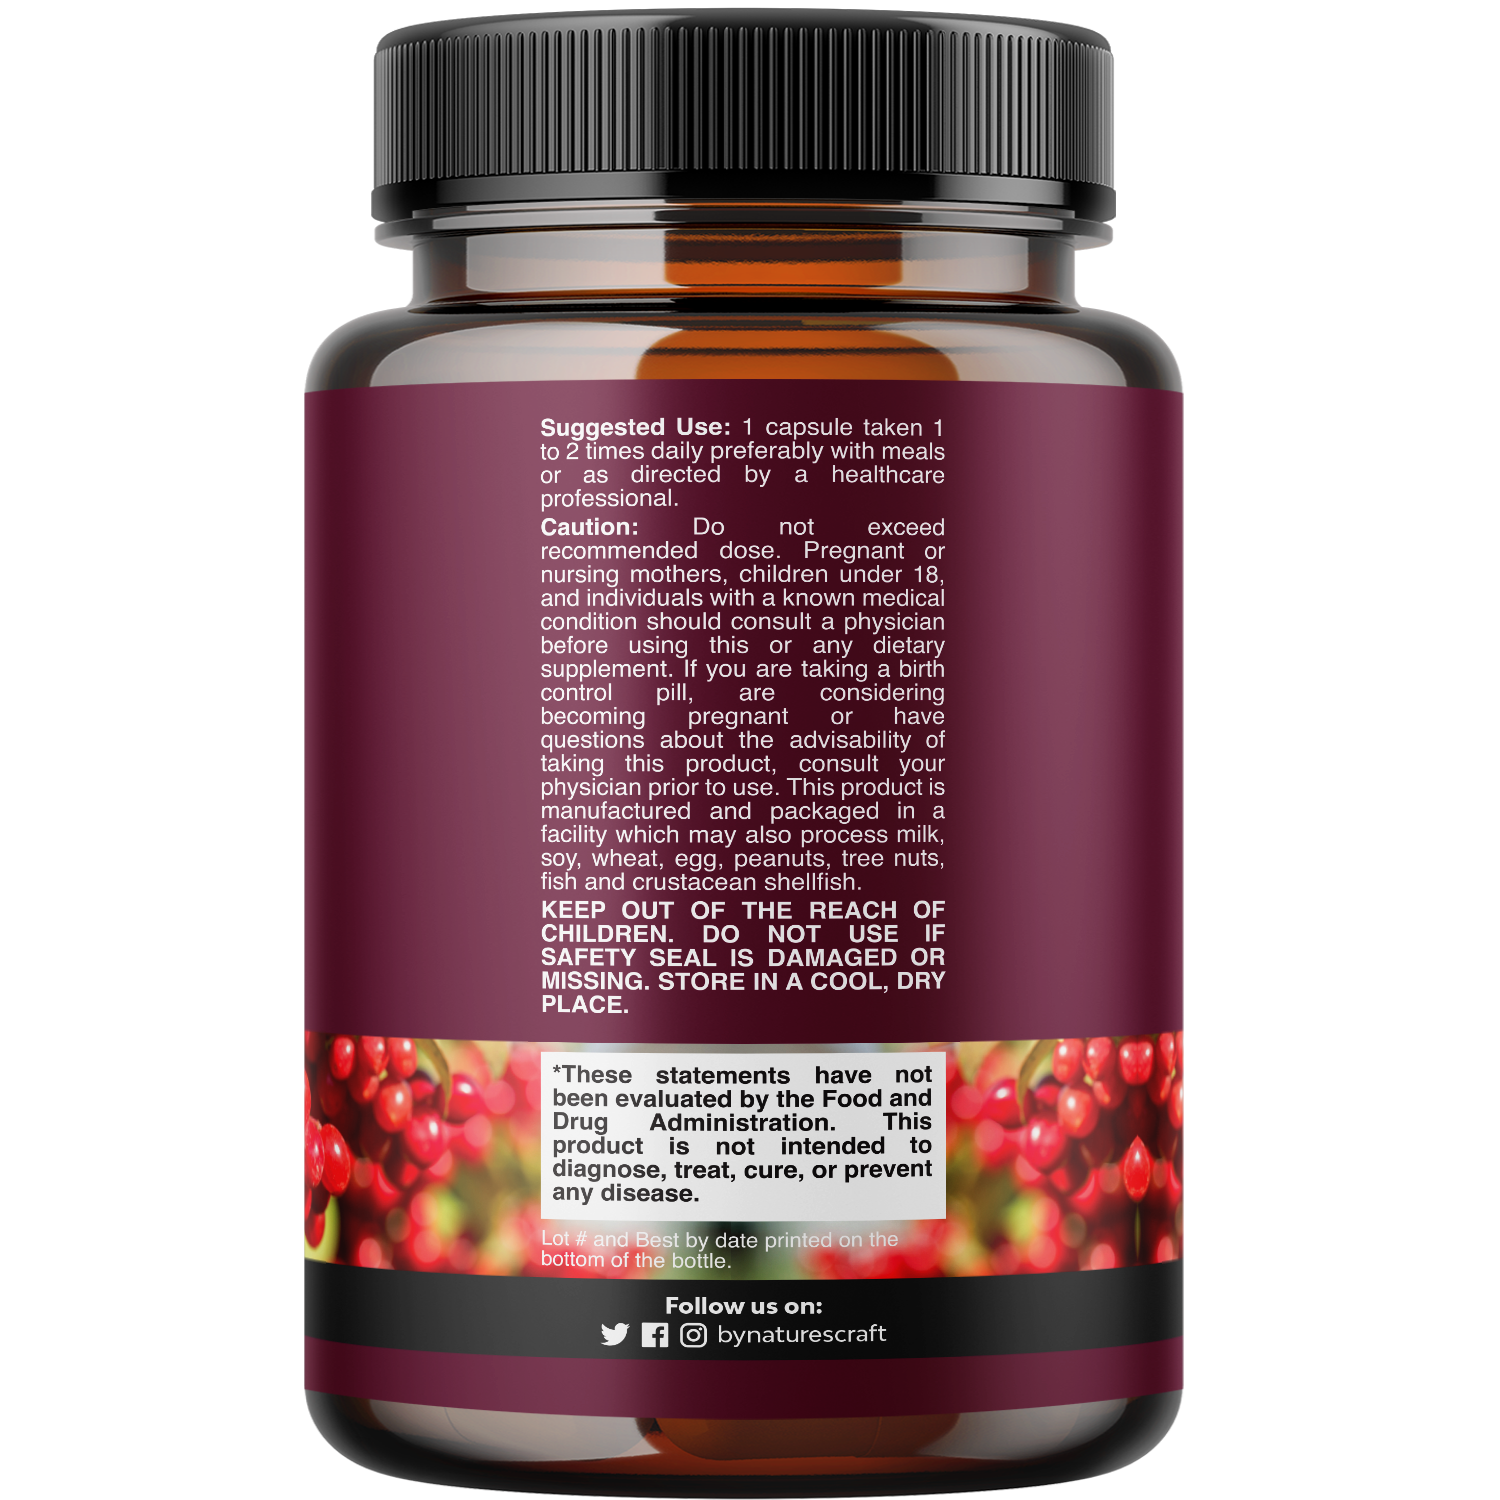 Kidney Support - 60 Capsules - Nature's Craft